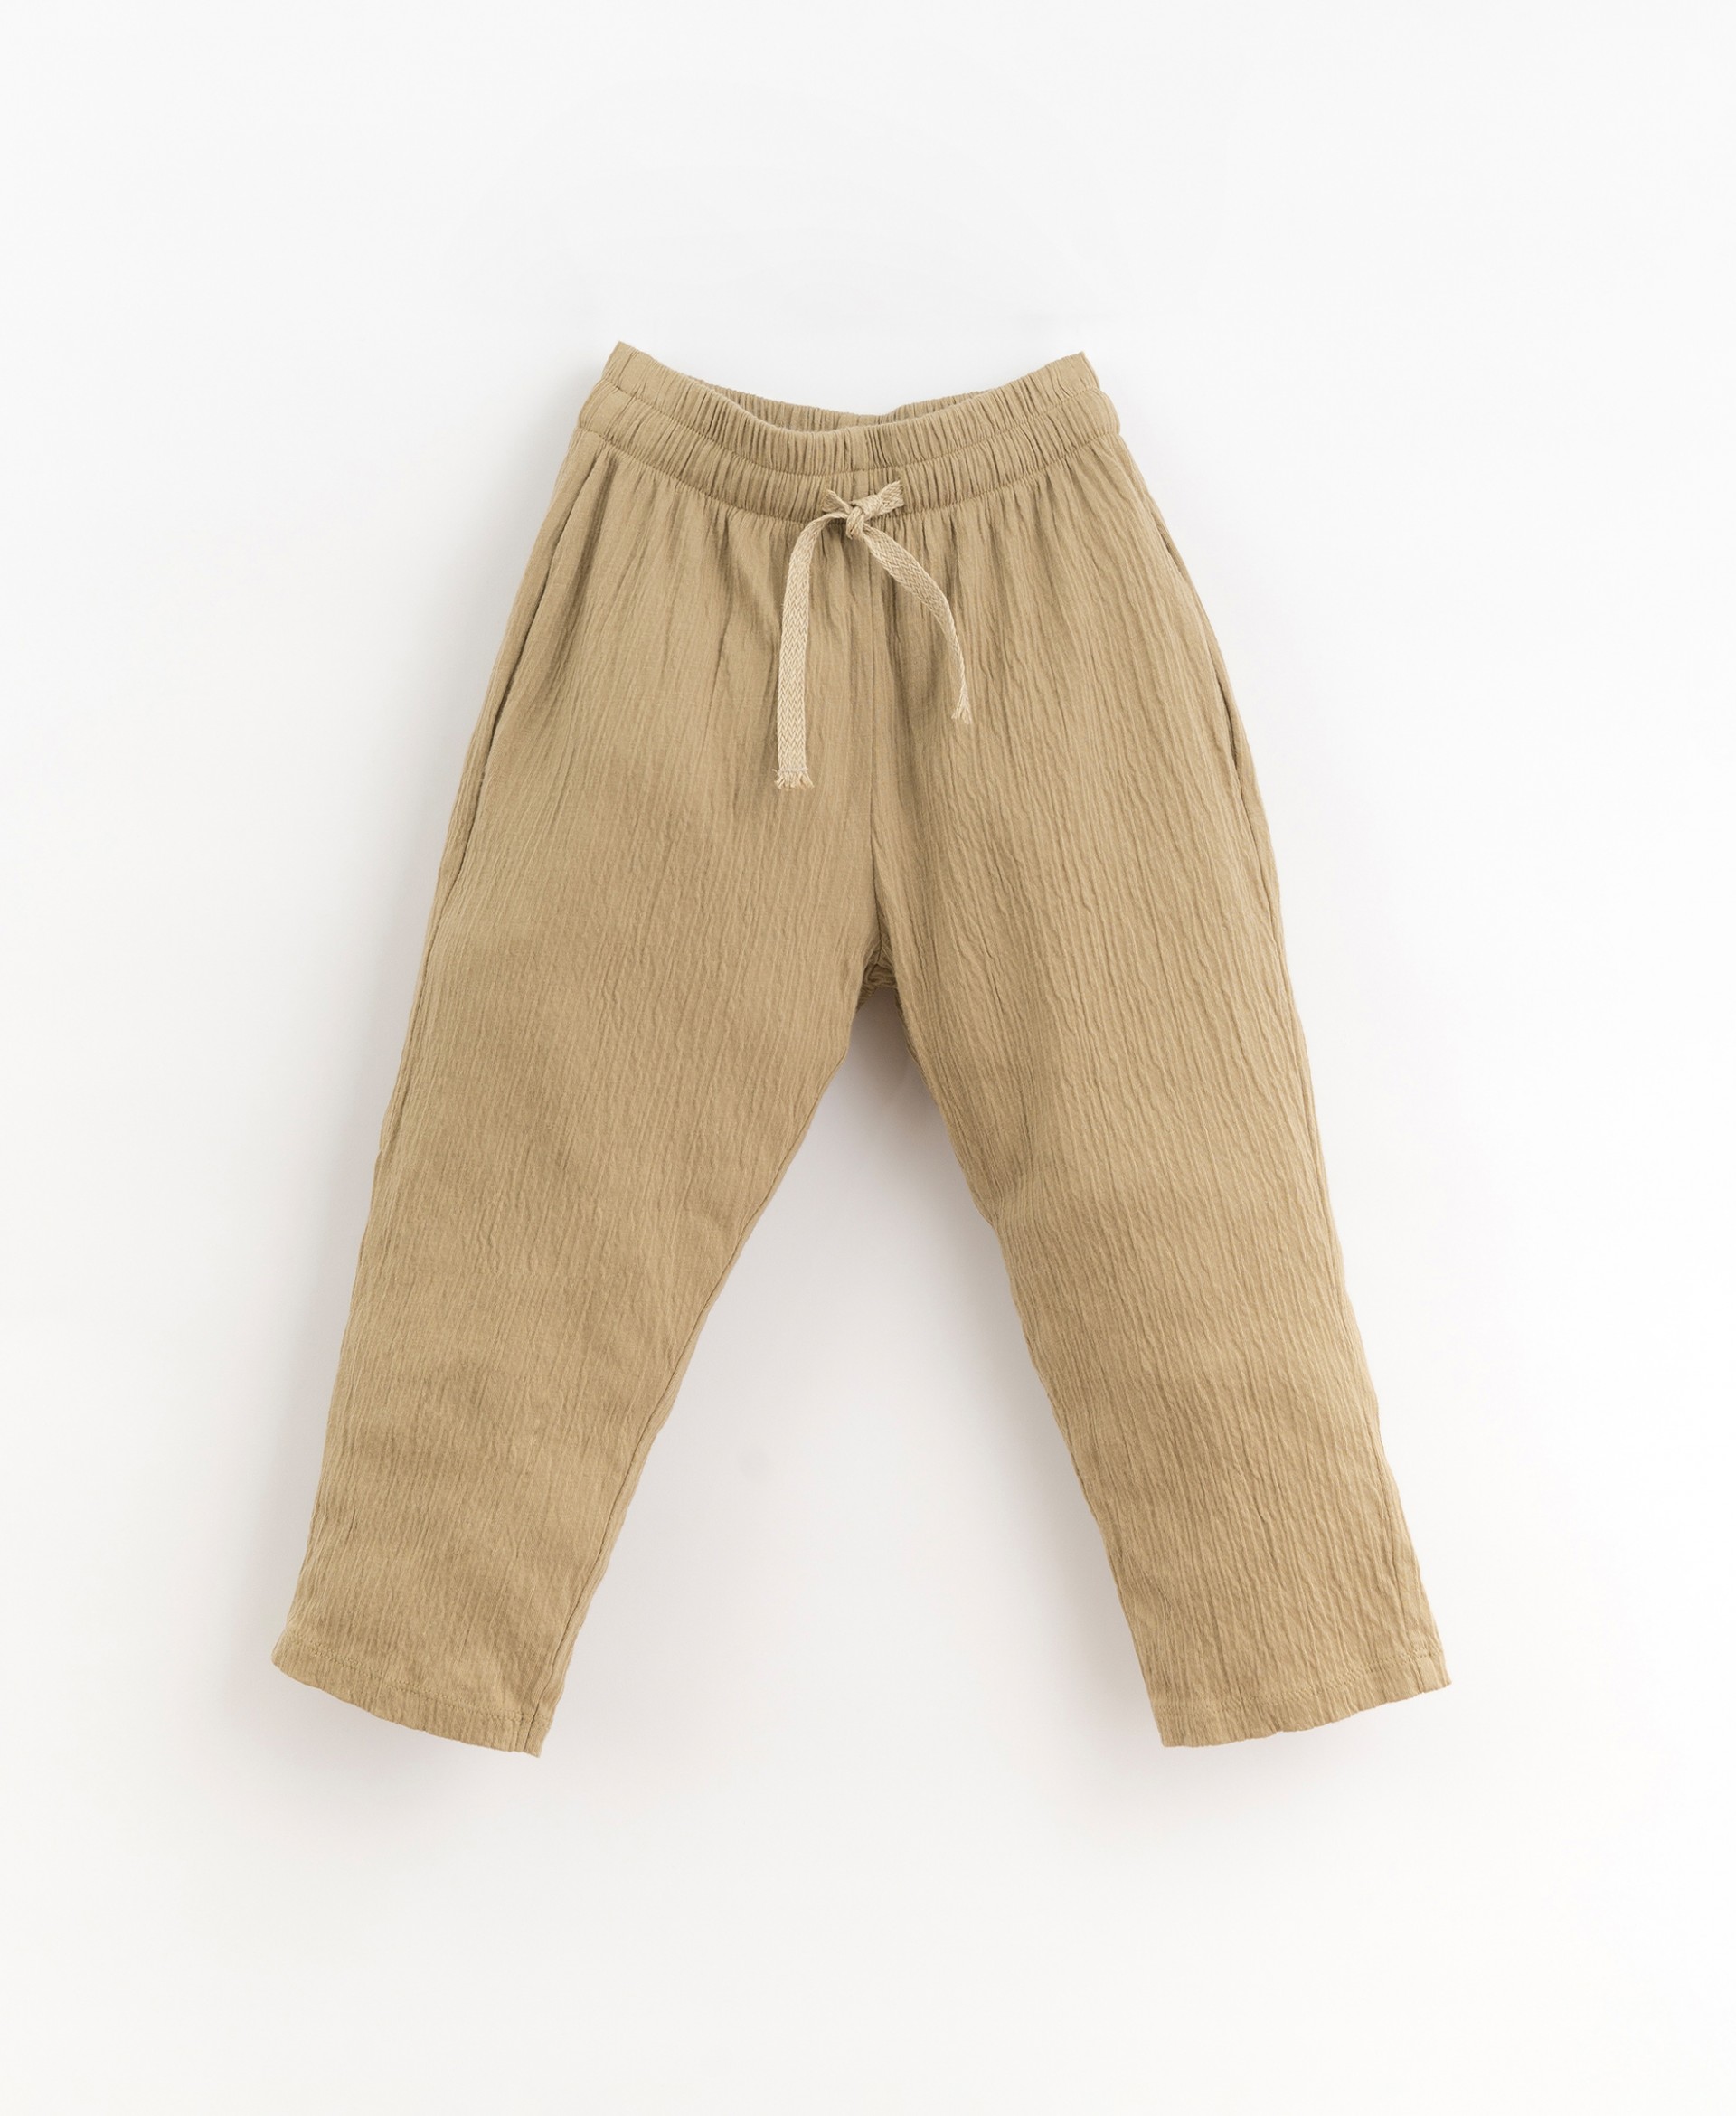 Jersey stitch trousers with adjustable drawstring | Organic Care